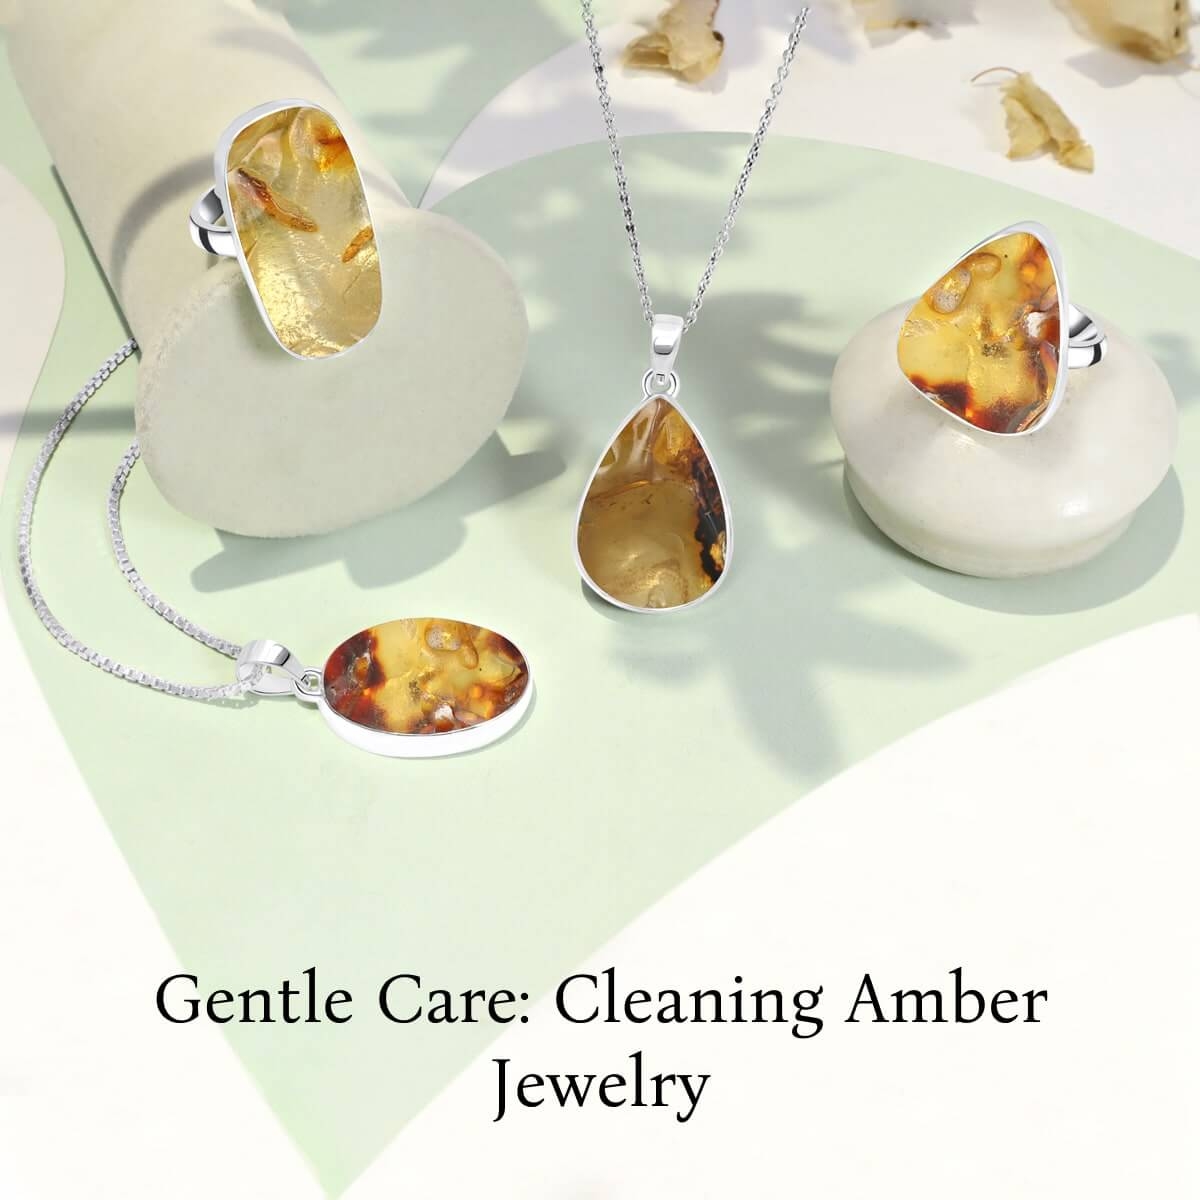 How to Clean Amber Gemstone Jewelry